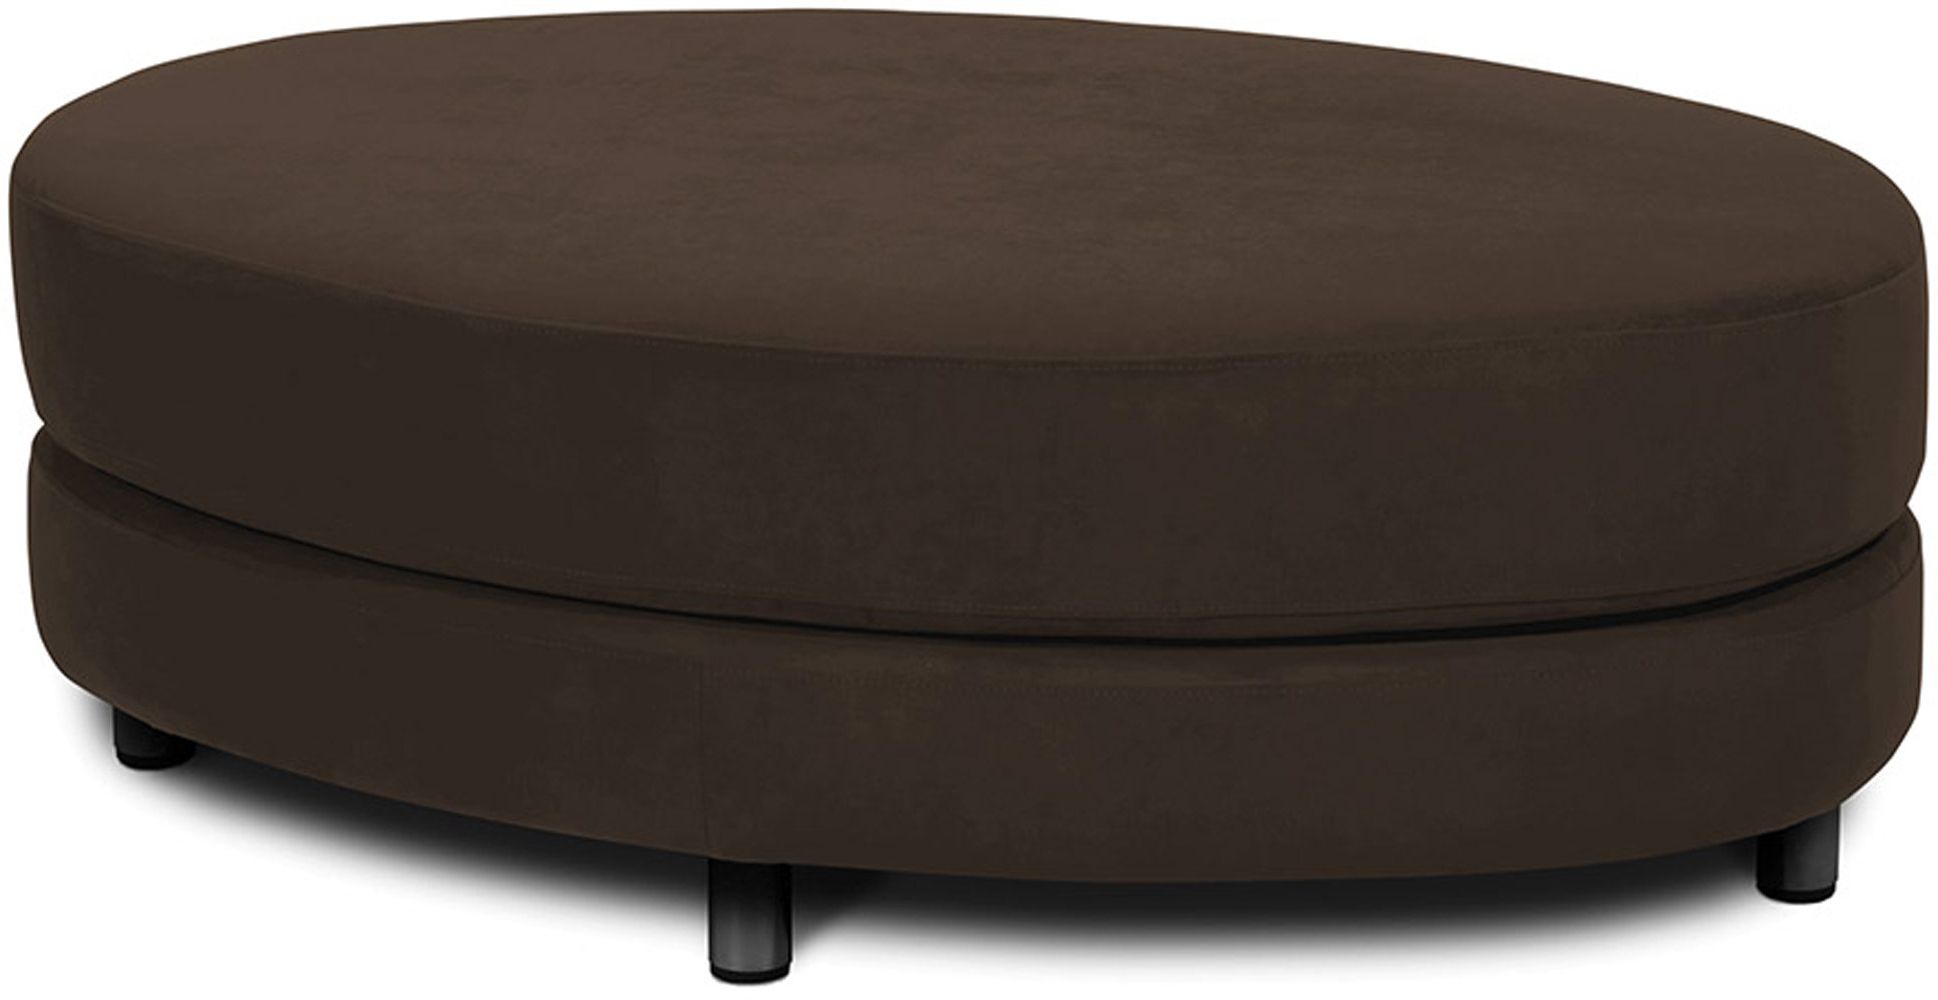 Gray Velvet Oval Ottomans With Regard To Preferred Roundabout Oval Ottoman Chocolate Velvet From The Benches Collection At (View 1 of 10)